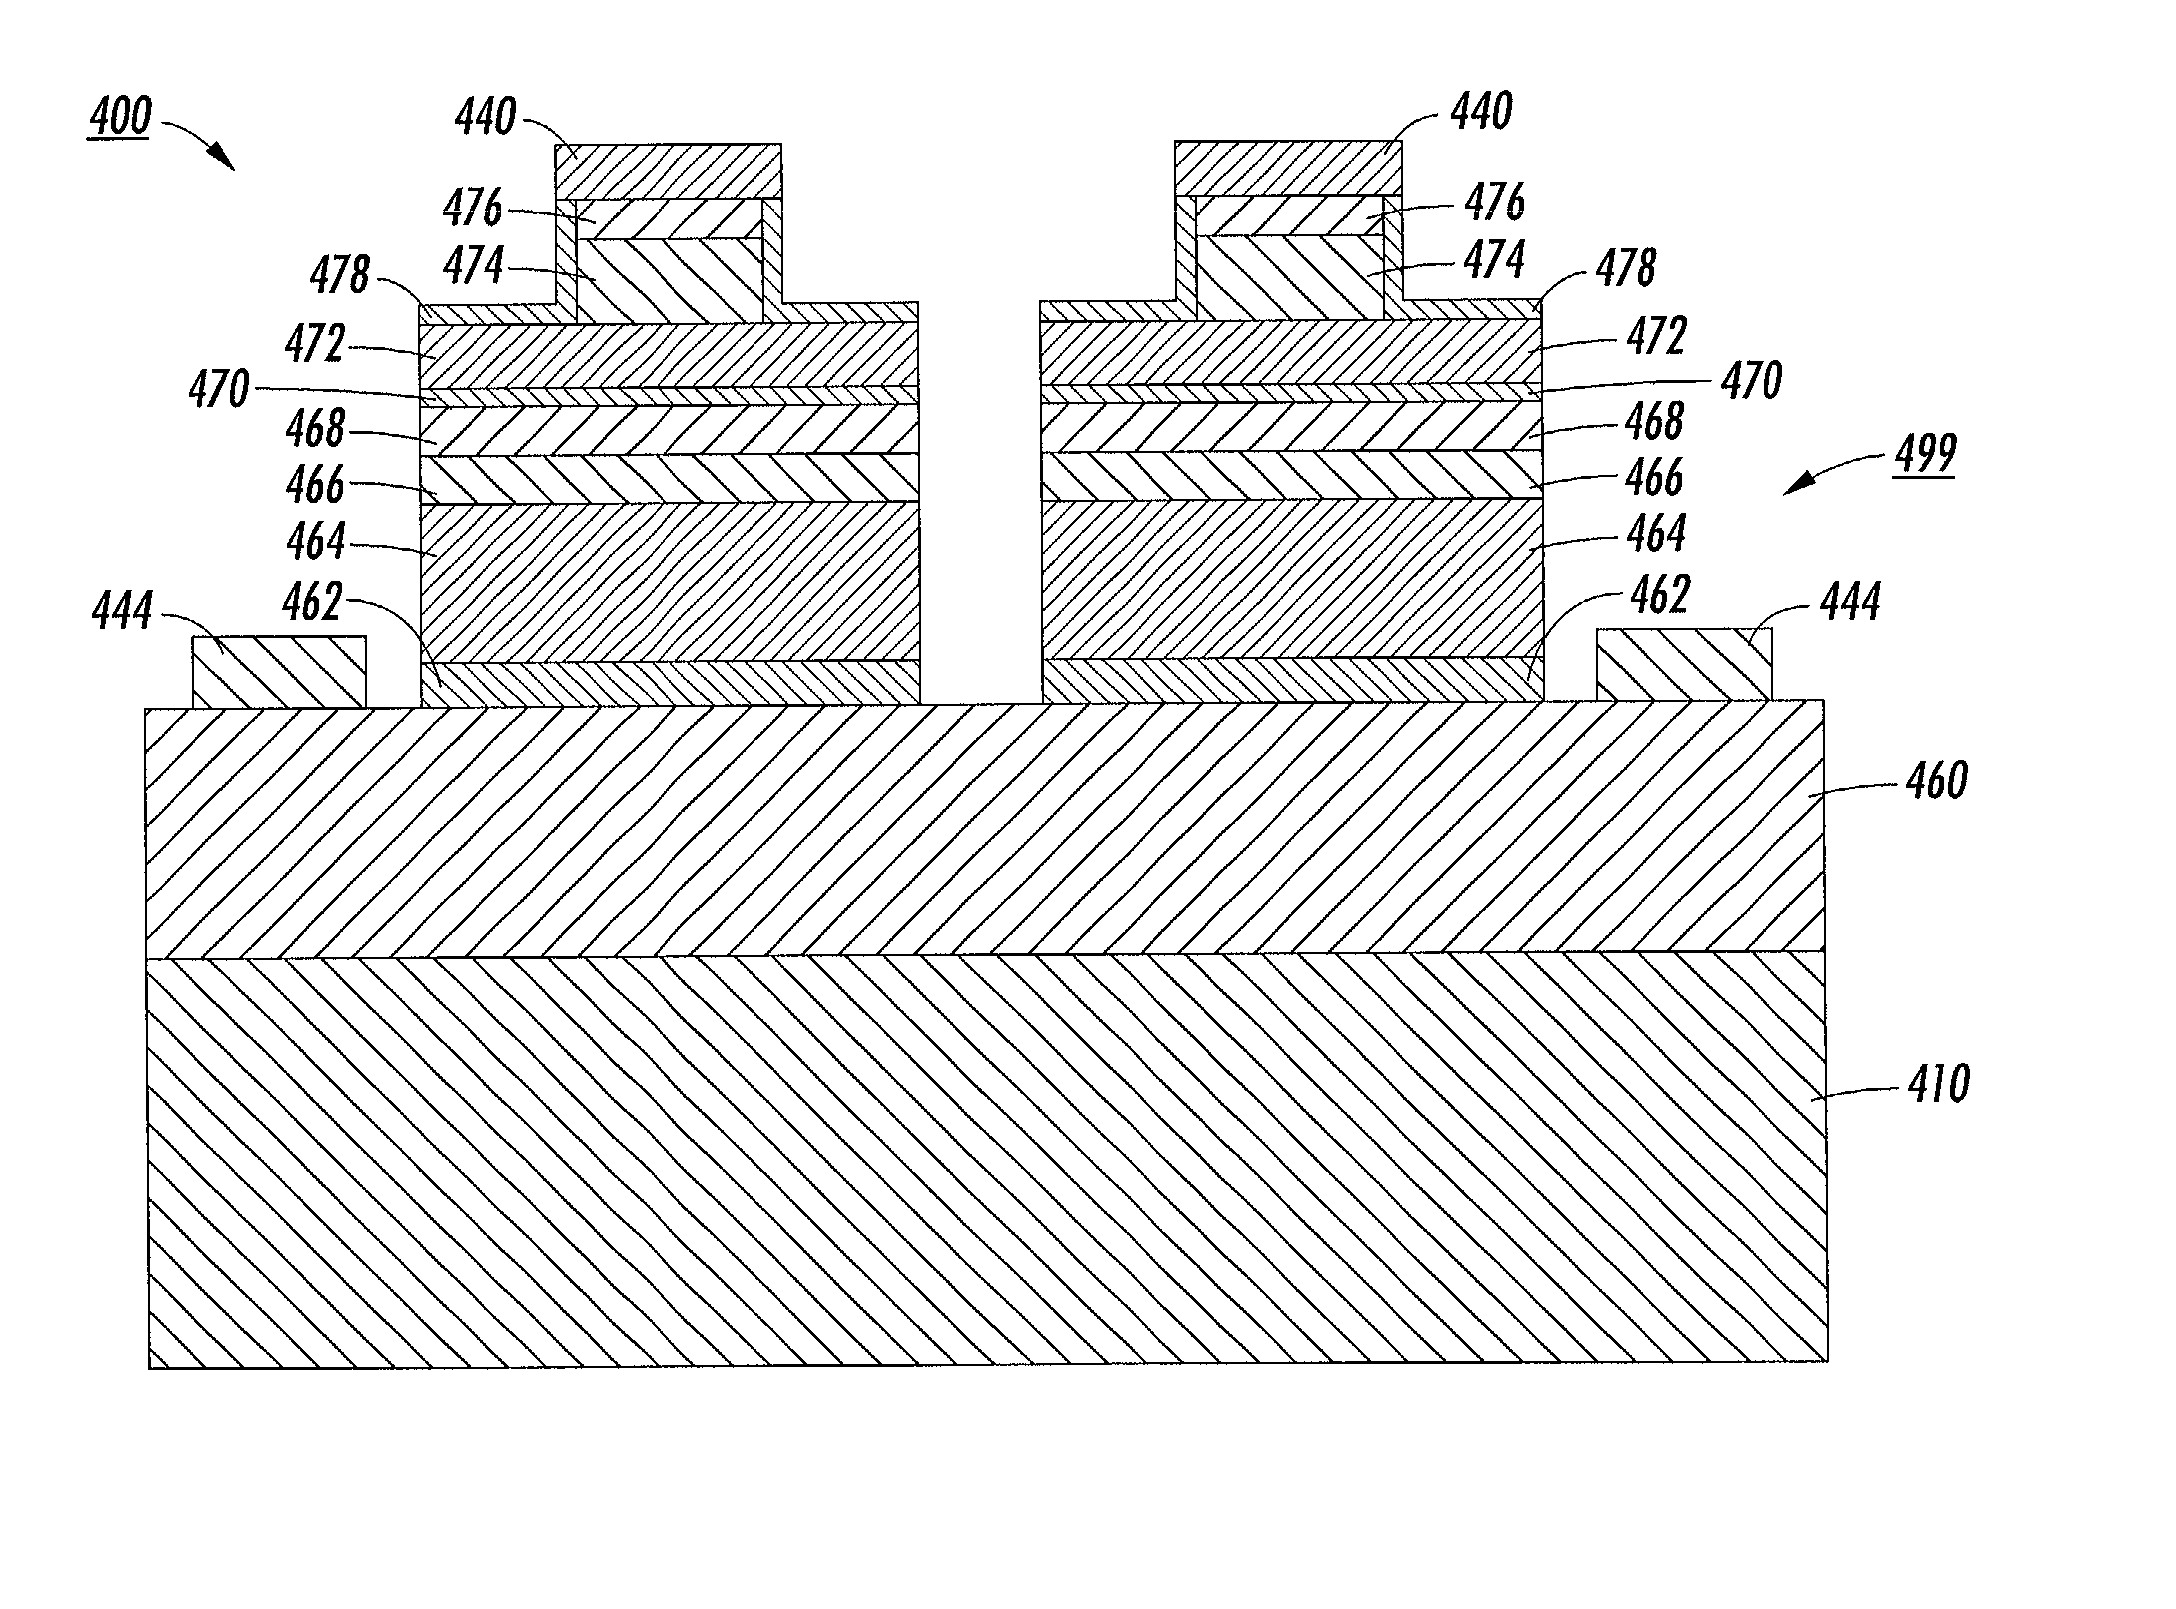 Substrates having increased thermal conductivity for semiconductor structures